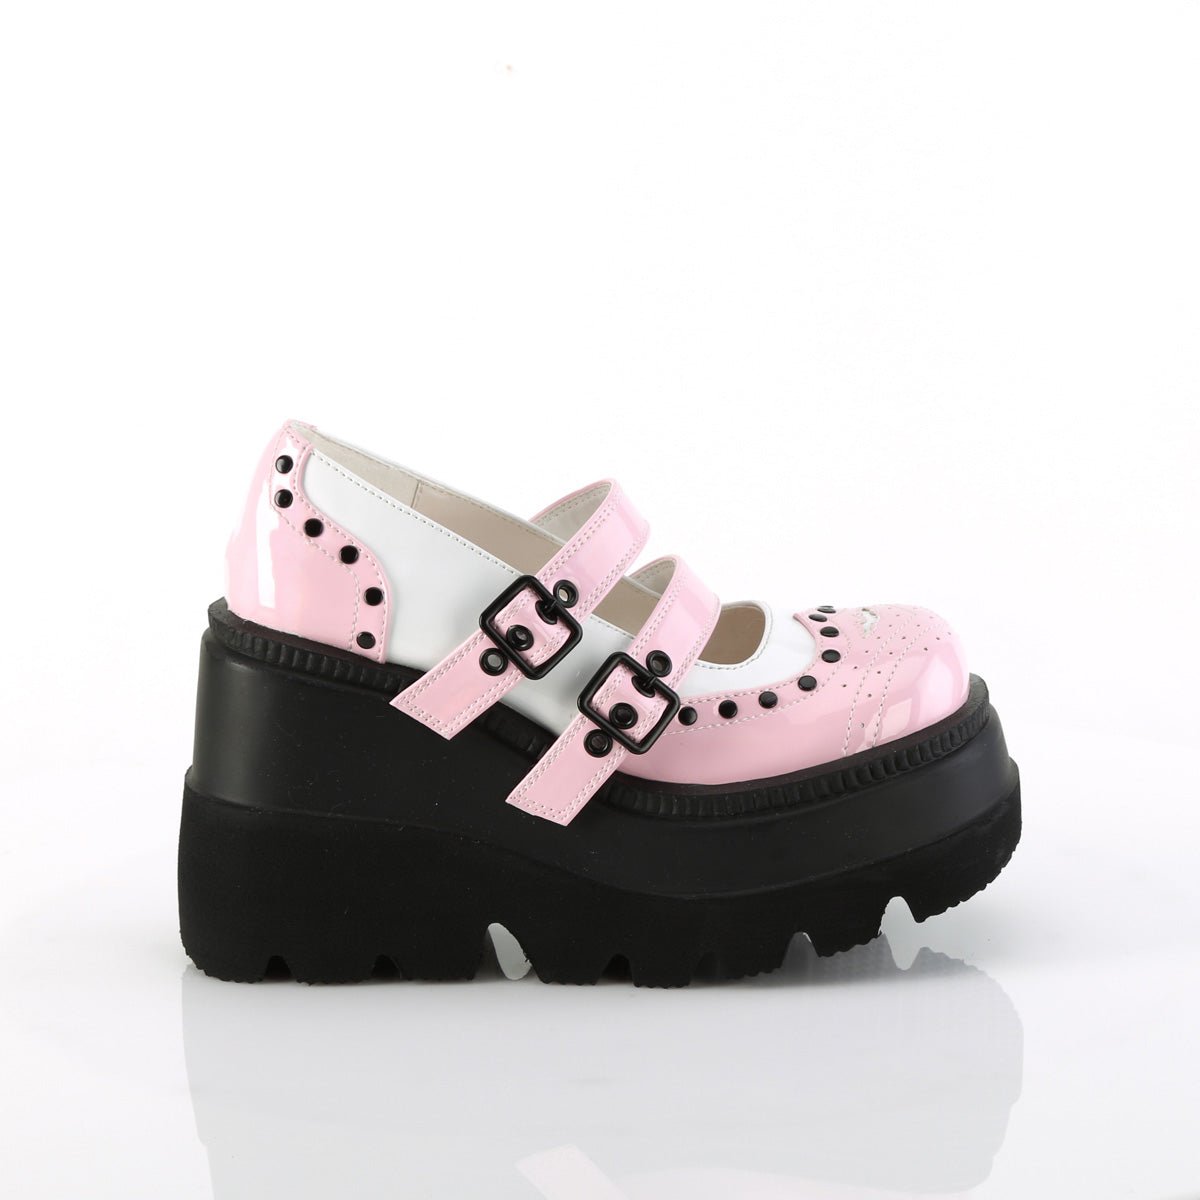 Too Fast | Demonia Shaker 27 | Baby Pink Patent Leather Women&#39;s Mary Janes